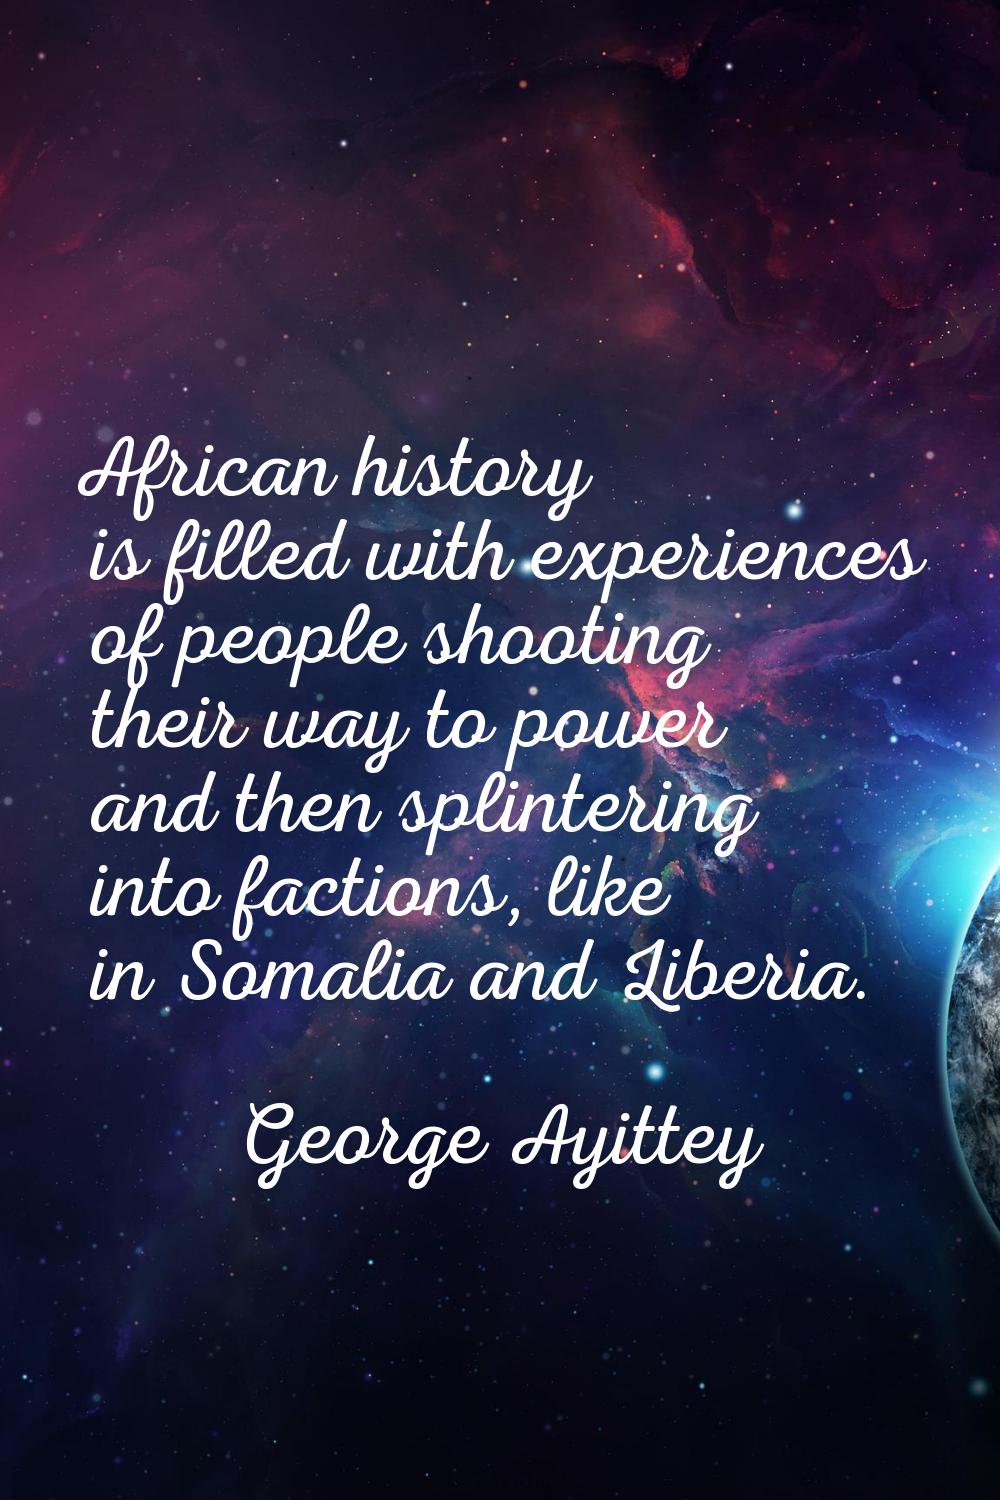 African history is filled with experiences of people shooting their way to power and then splinteri